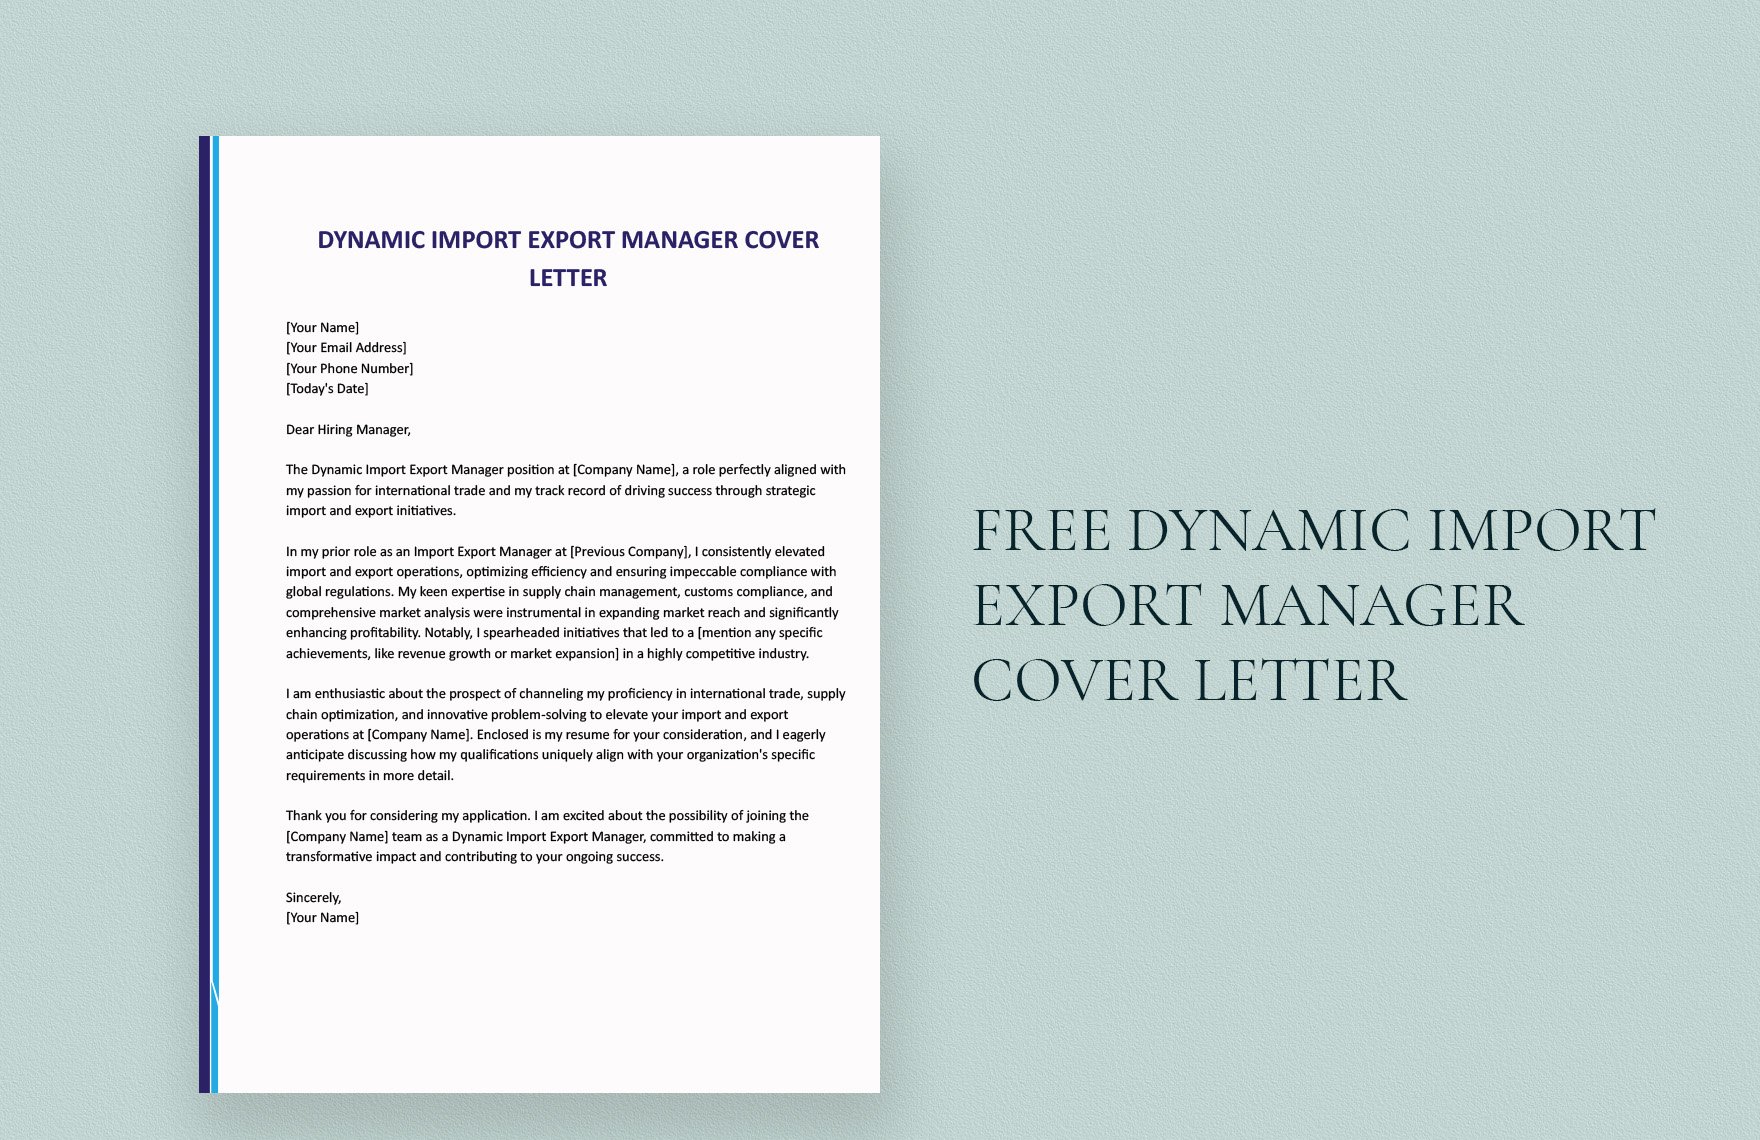 Dynamic Import Export Manager Cover Letter in Word, Google Docs